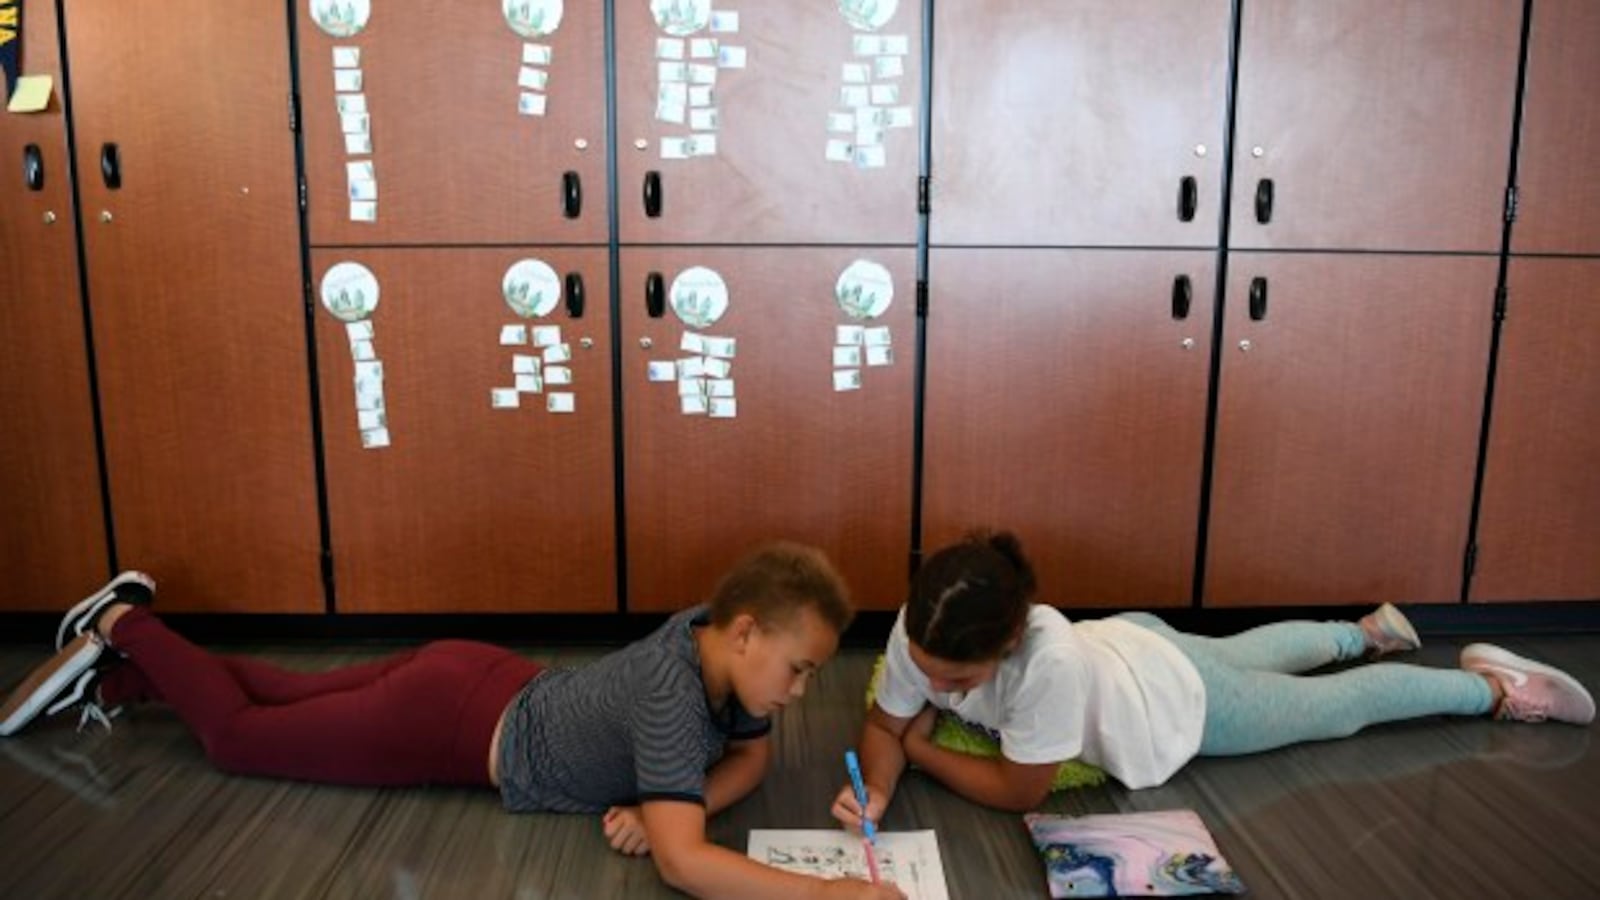 Finley Checa, left, and Ava Weeden, both 11, work on a project in their science class at Denver Green School Northfield.